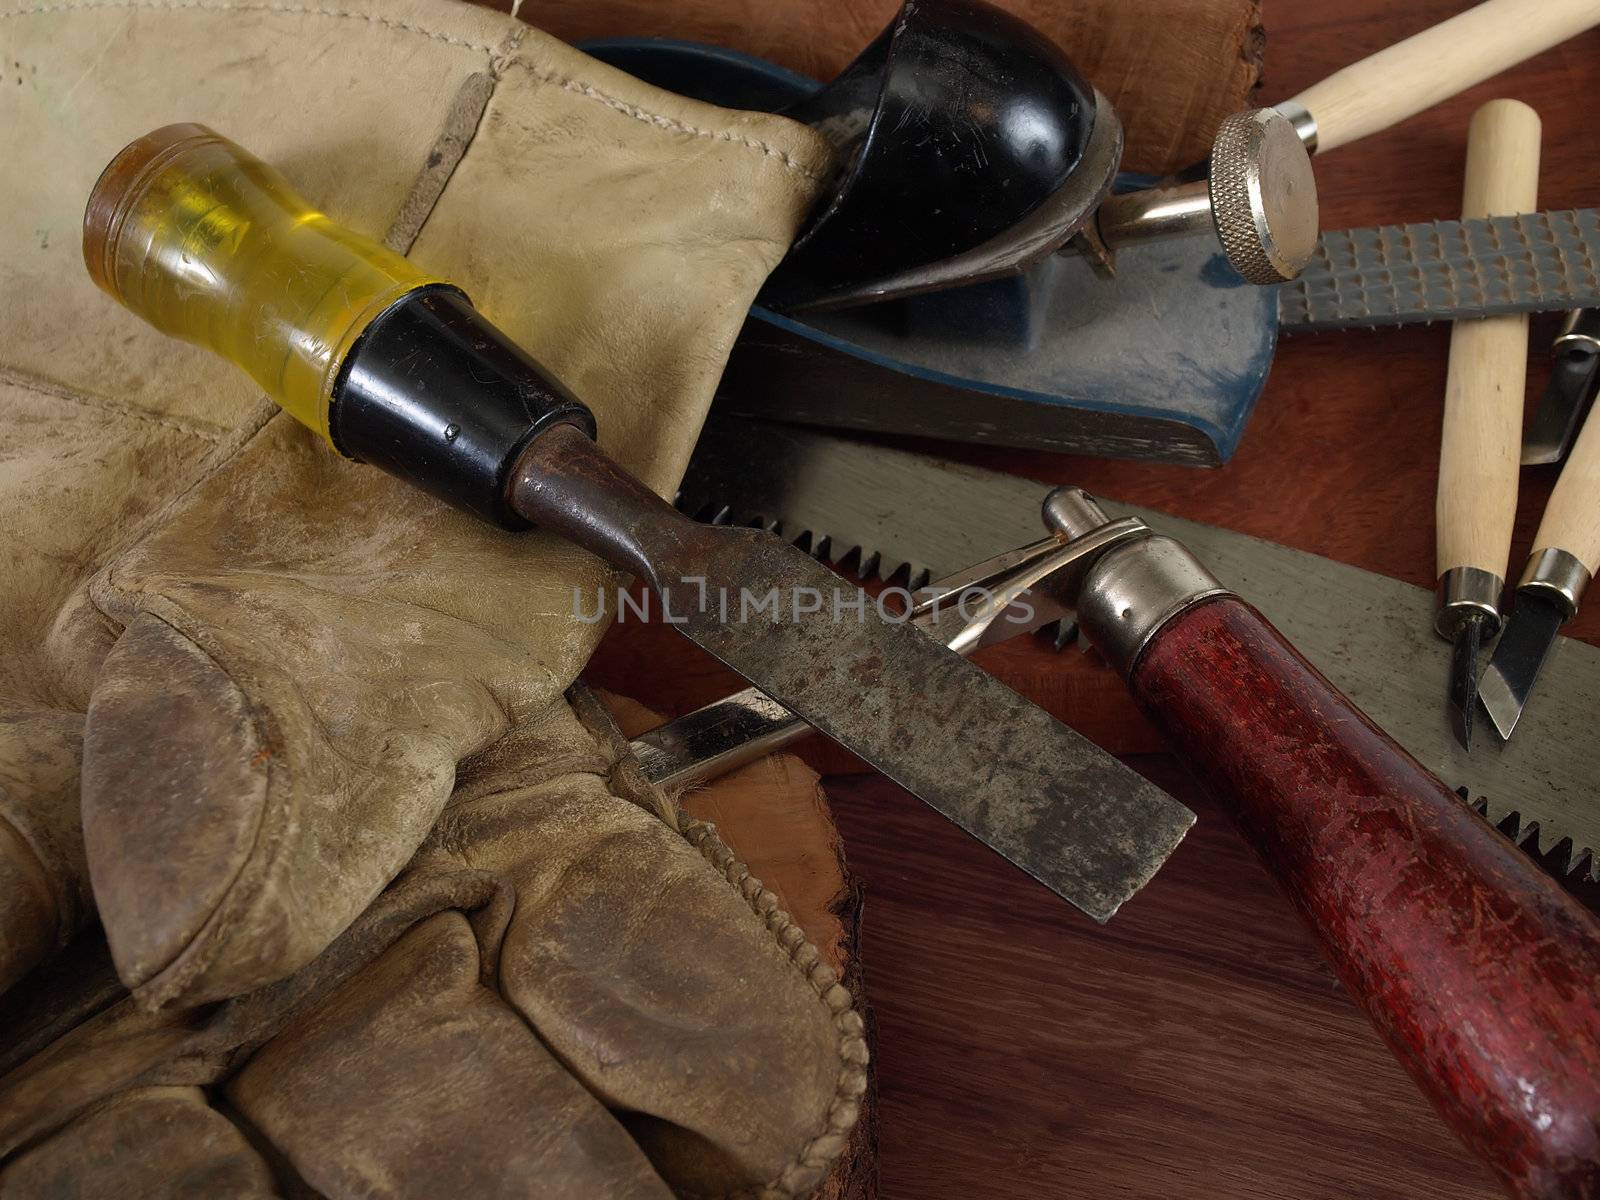 Various woodworking tools and gloves on a wood texture background.